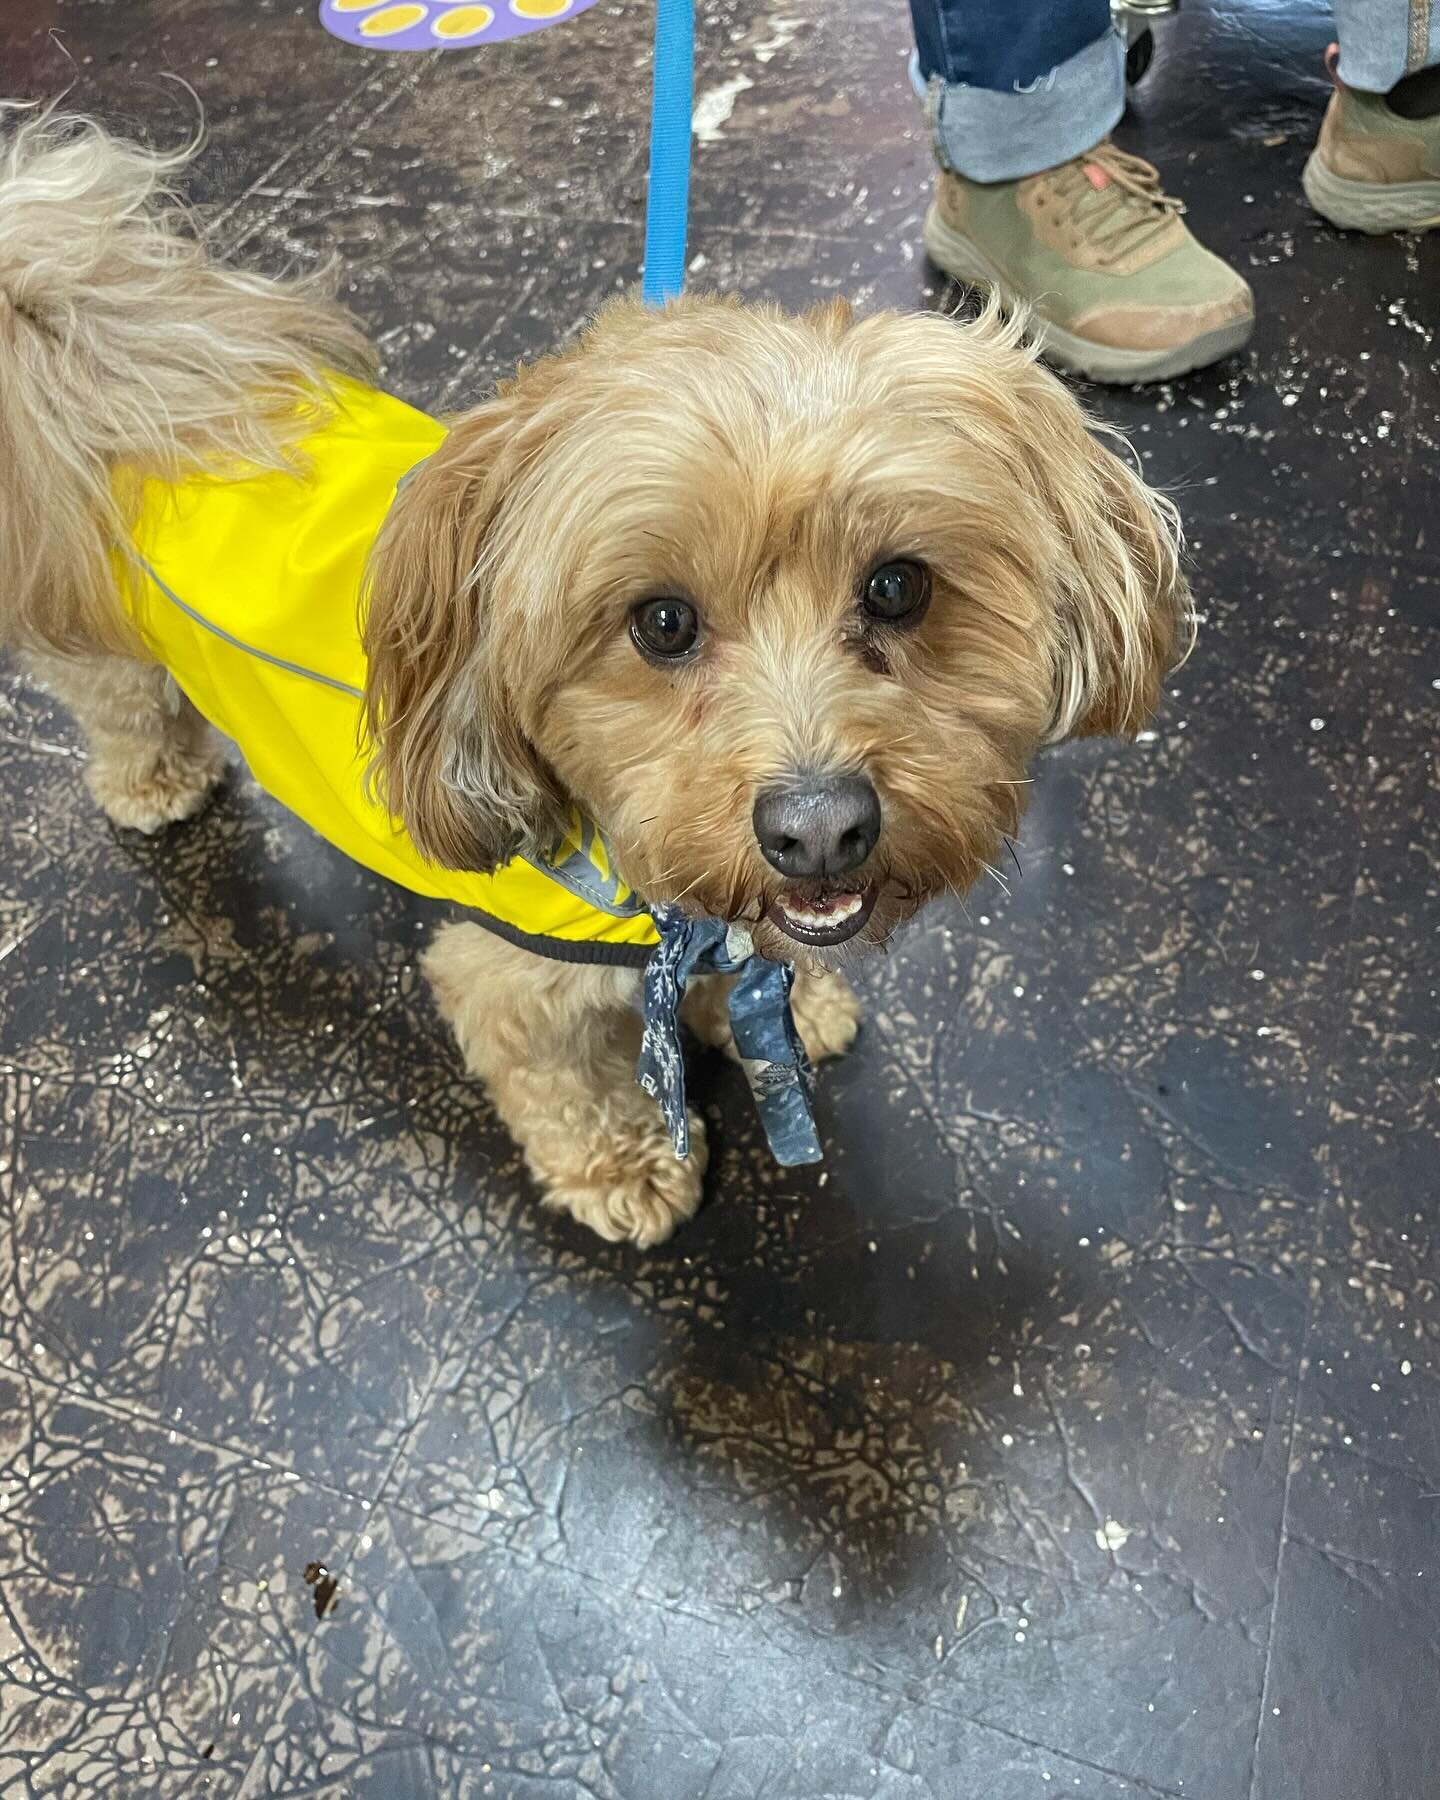 Meet Cedar! He bought a bright yellow raincoat today to match his Mom&rsquo;s. Come down to Wag! to get a matching coat for your pets!